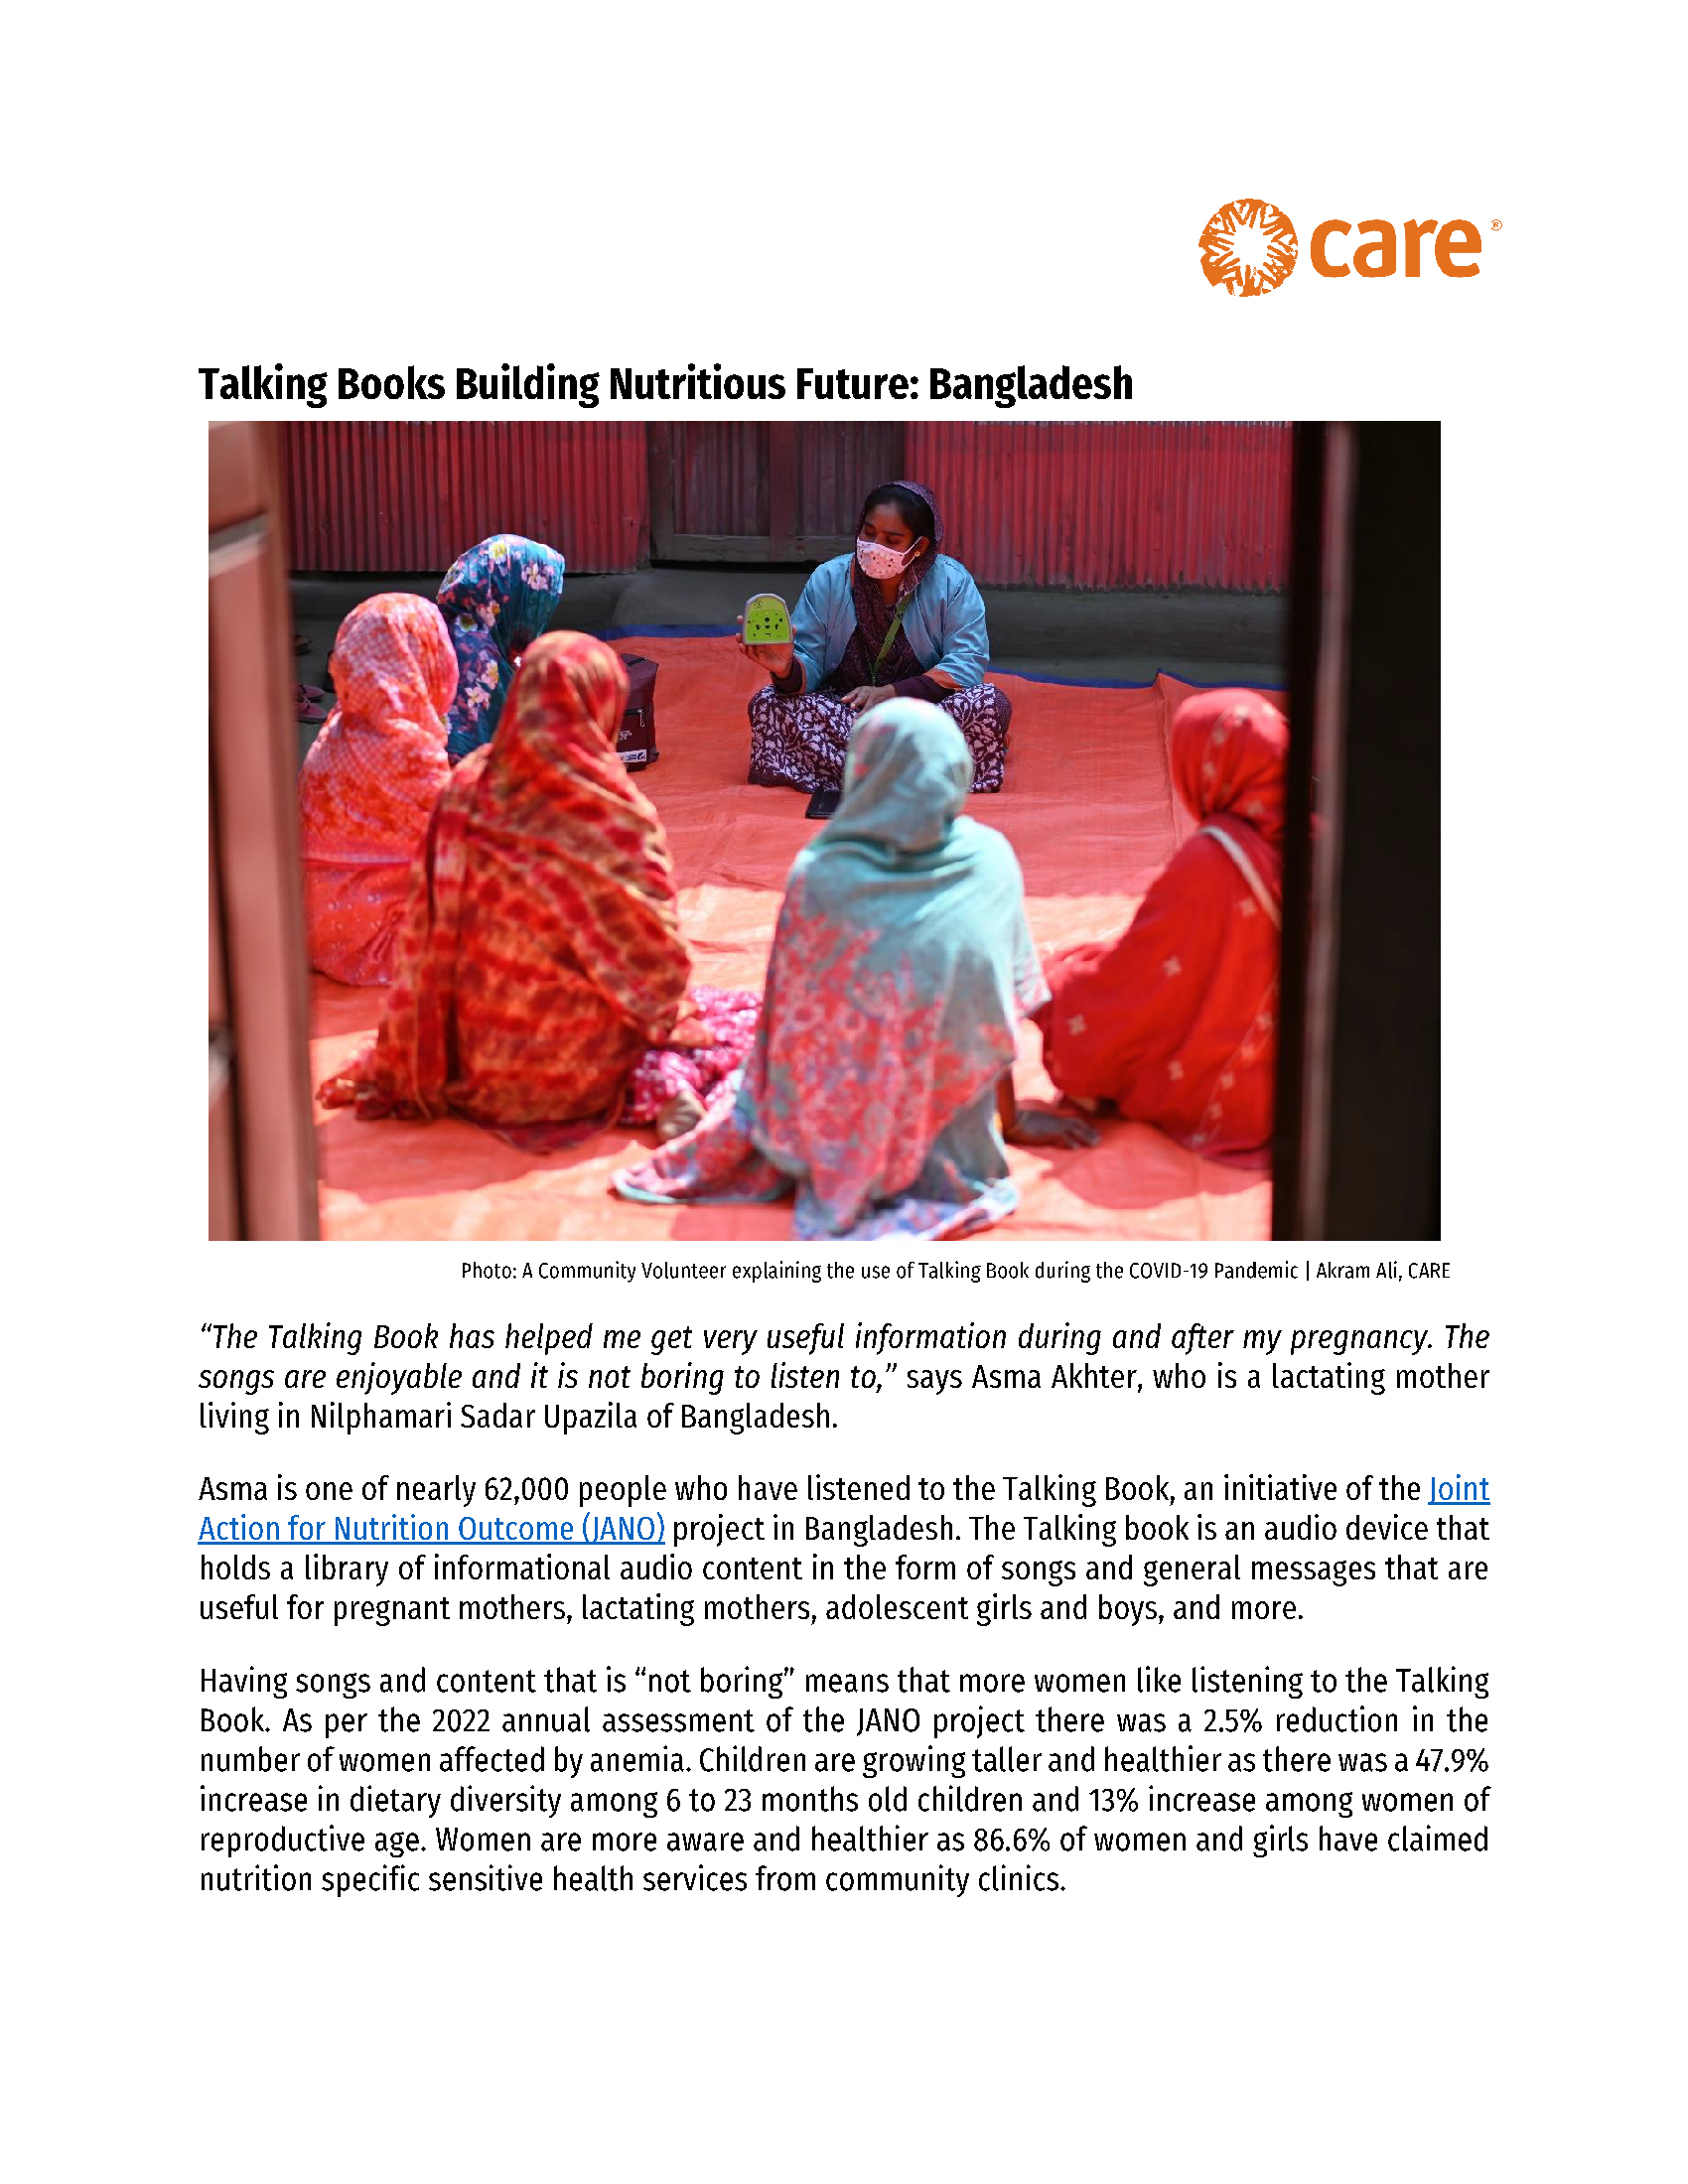 Cover page for the Talking Books Building Nutritious Future: Bangladesh